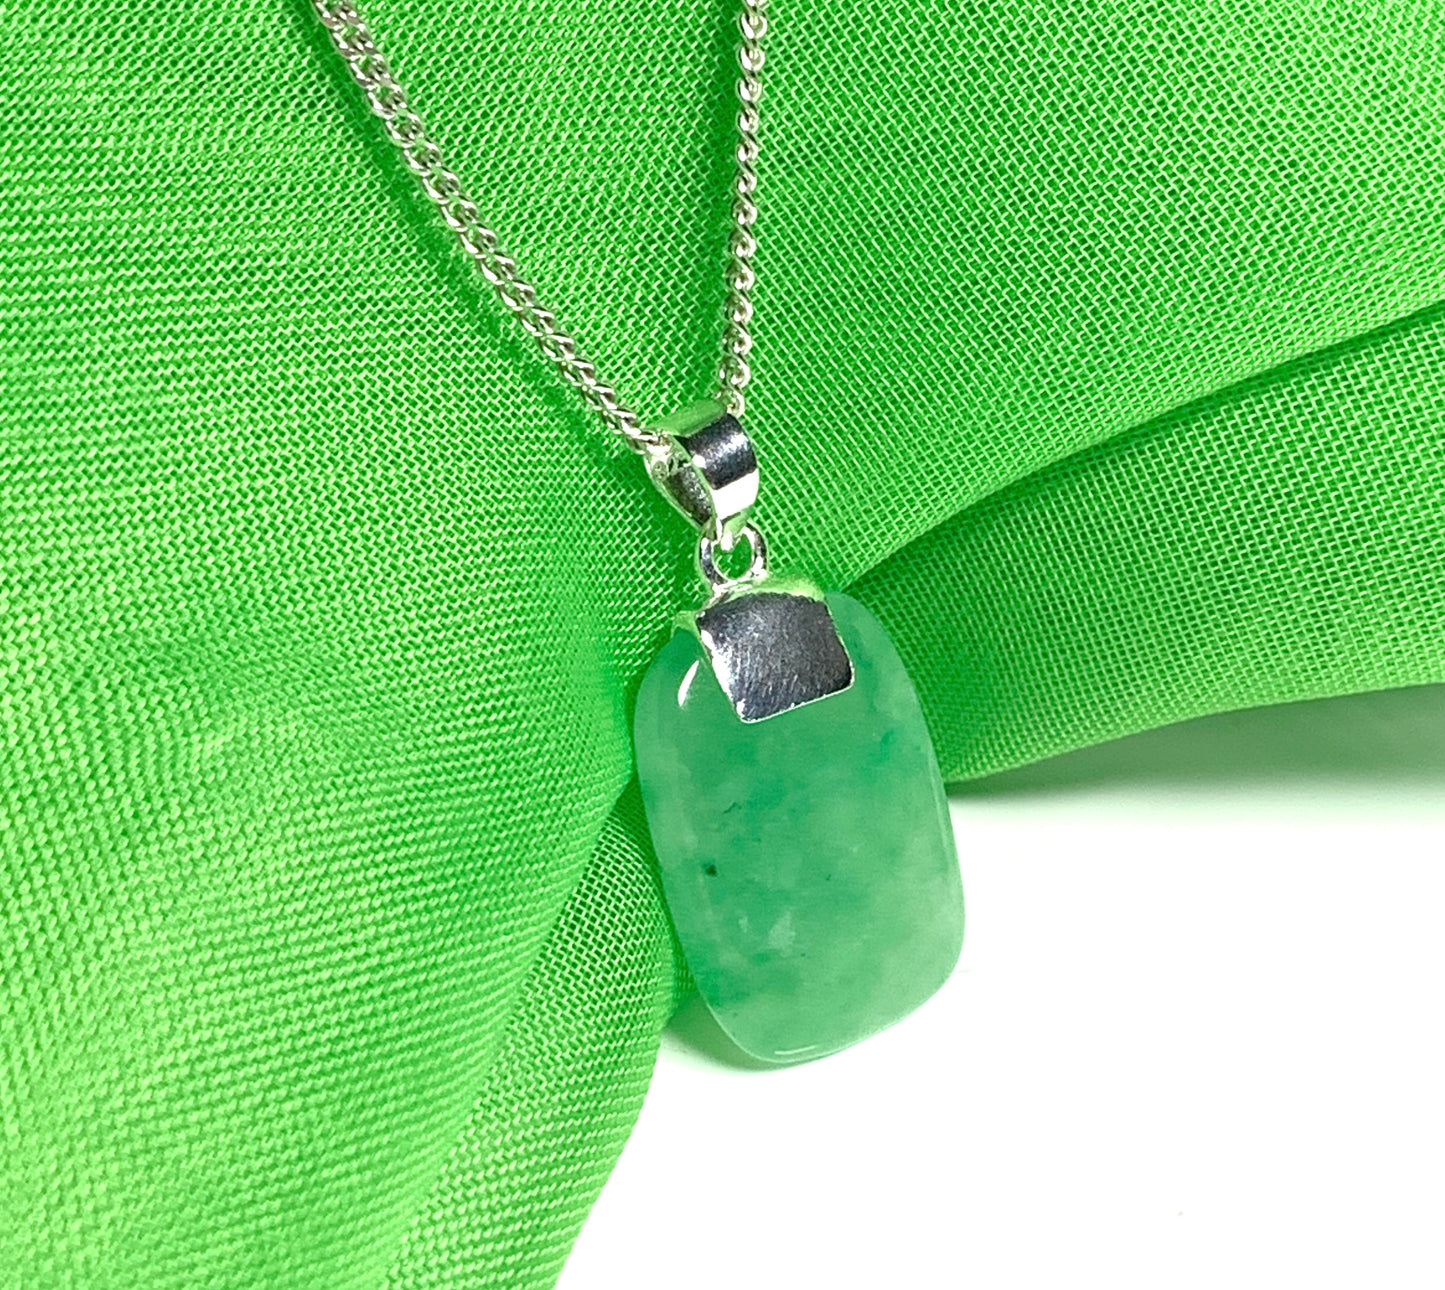 Green real jade necklace cushion shaped stone sterling silver pendant